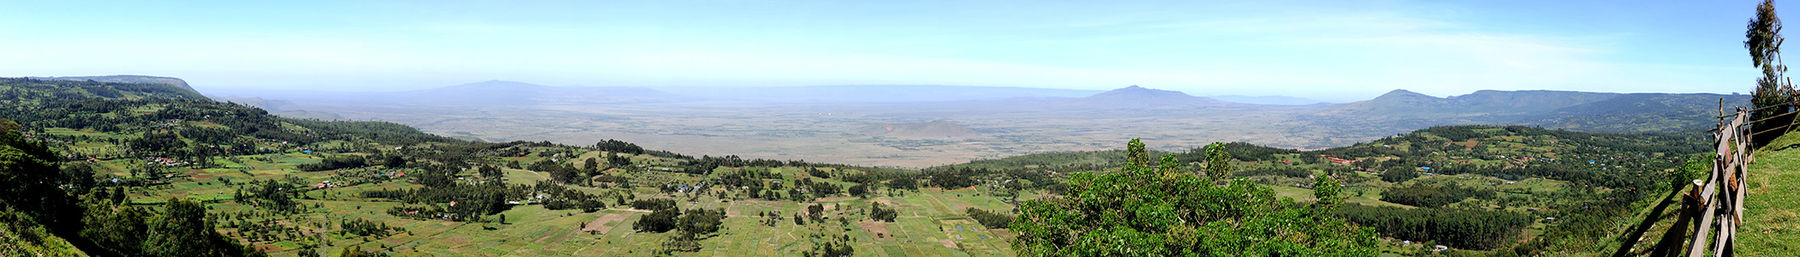 Great Rift Valley, Κένυα